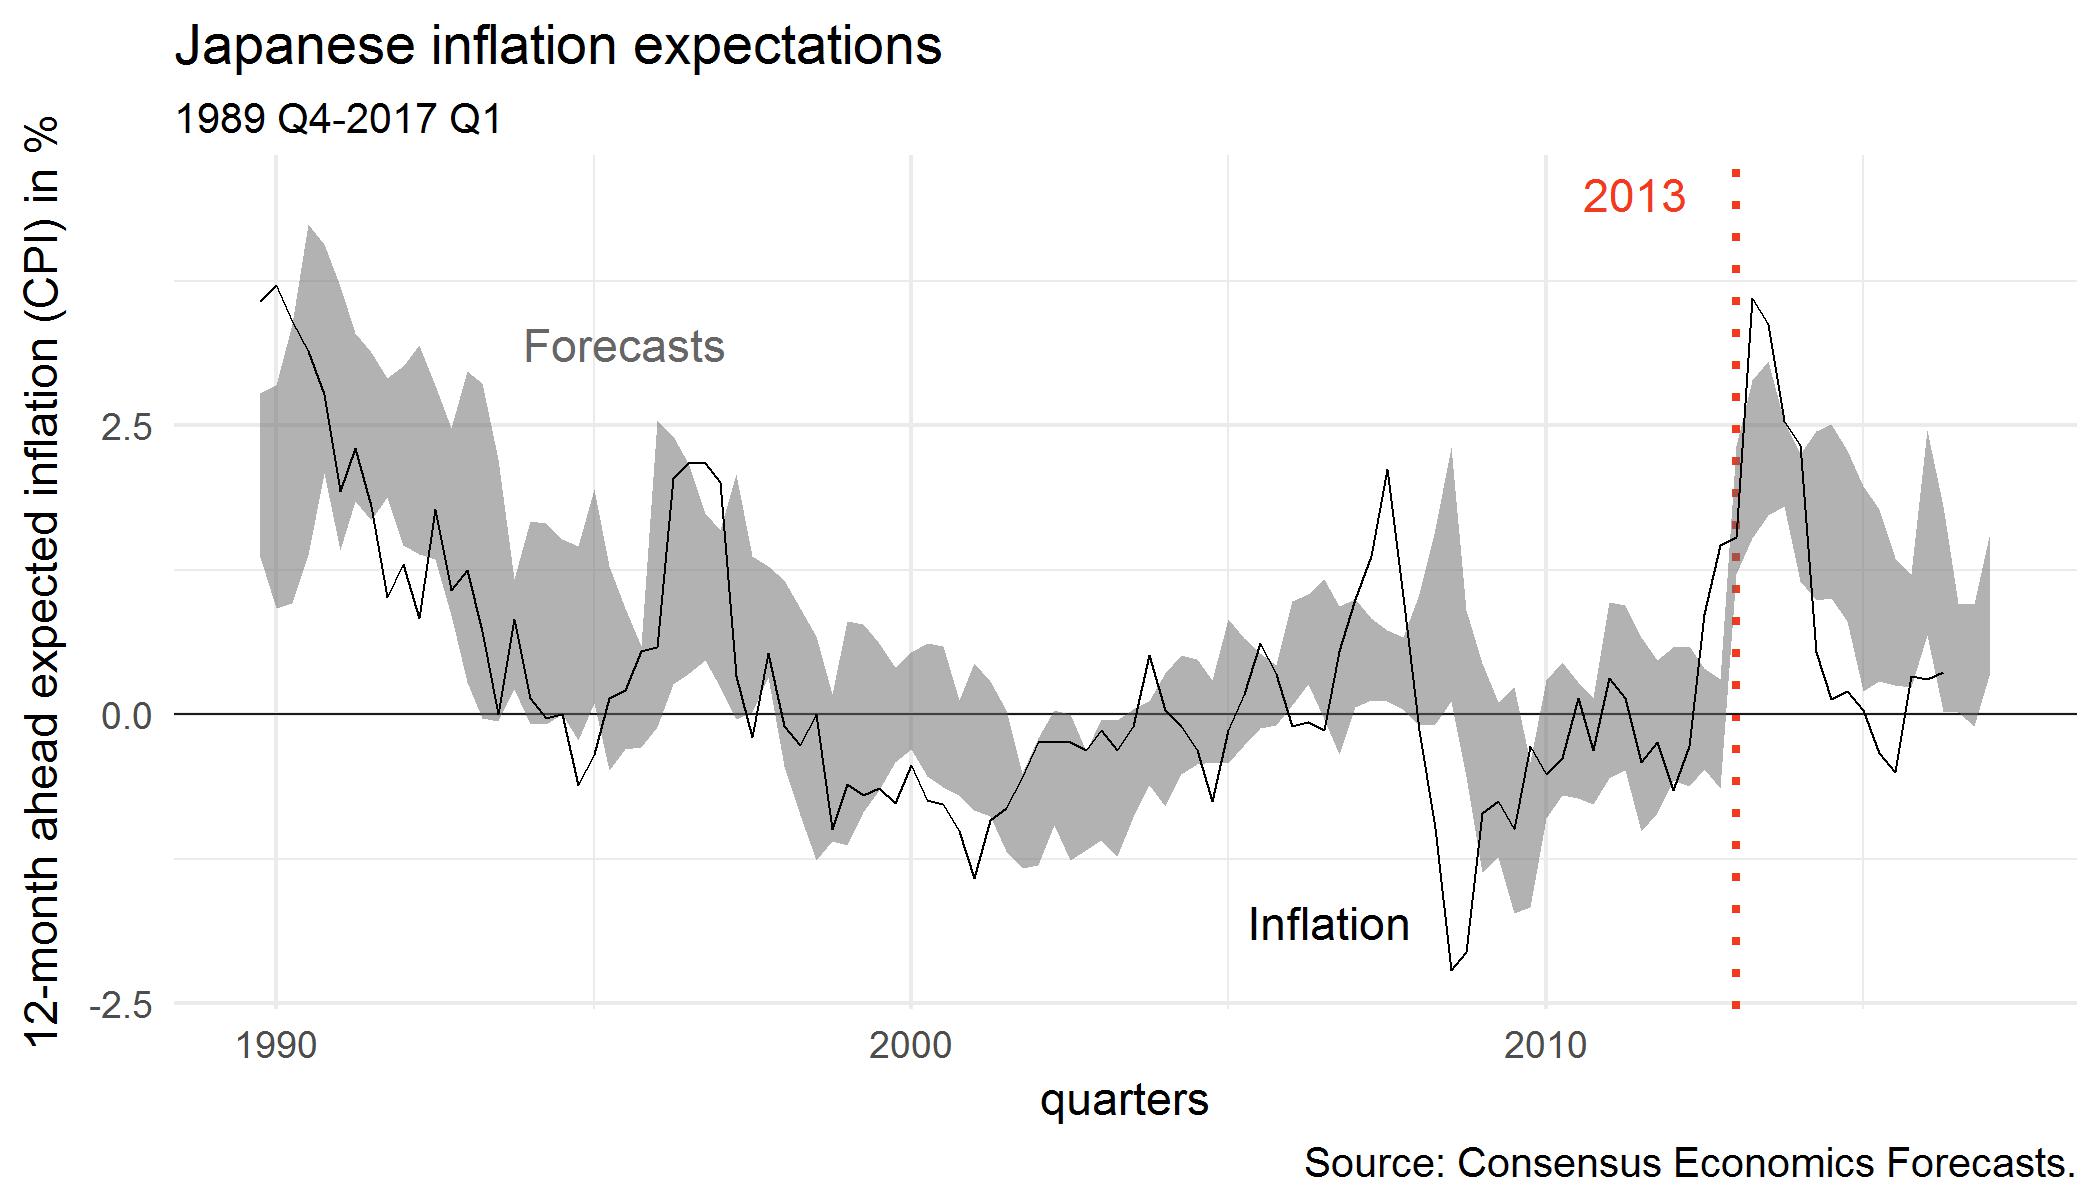 Inflation expectations in Japan, influenced by Abenomics